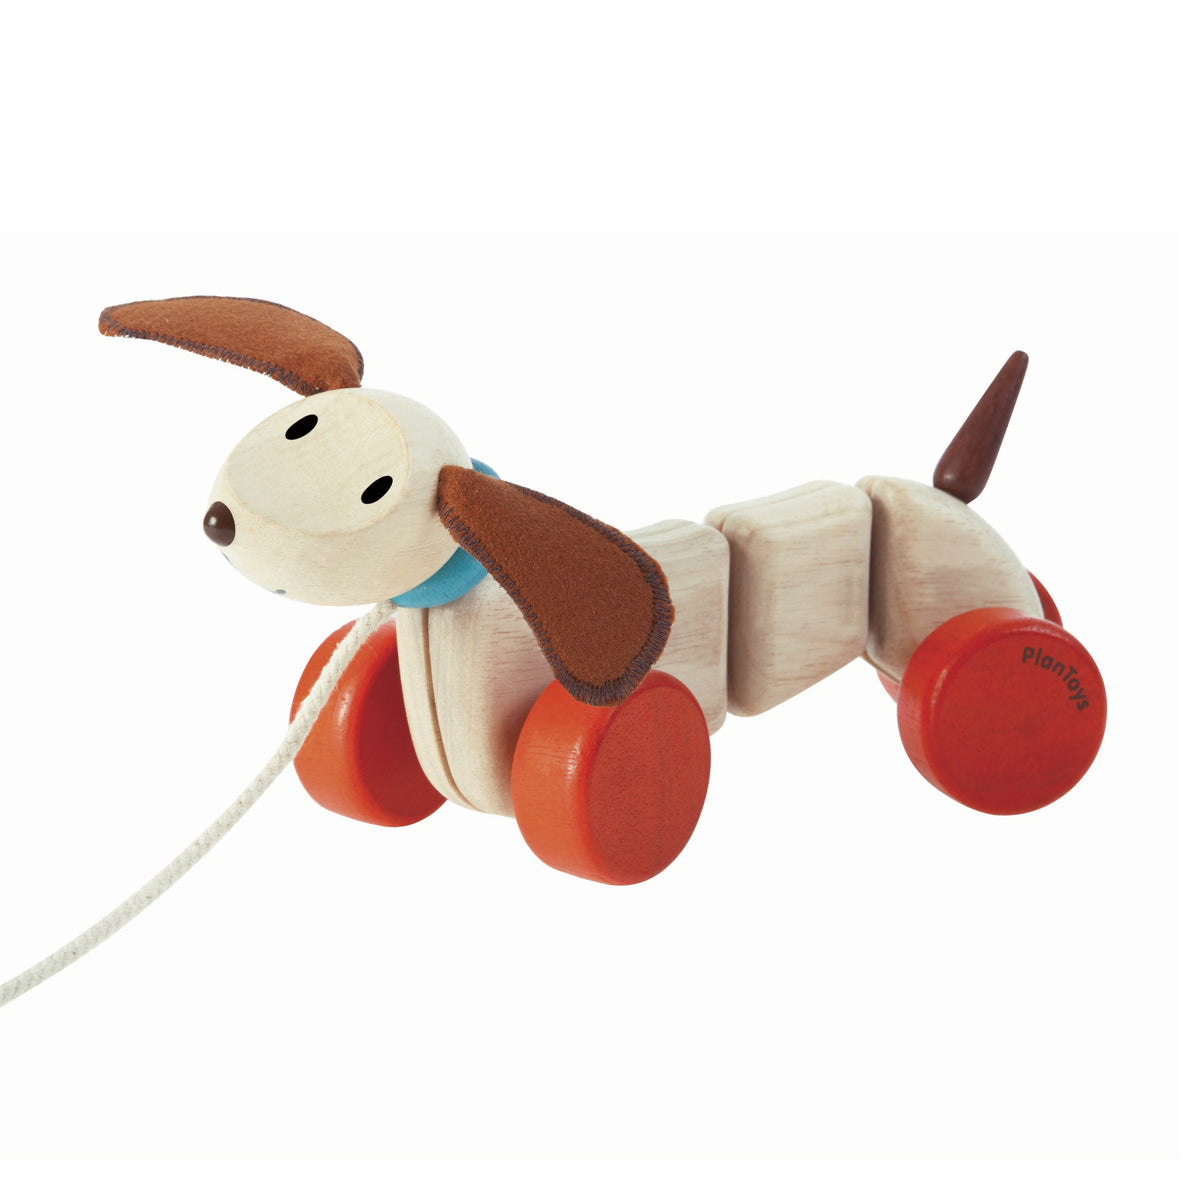 Happy Puppy pull along dog from Plan toys